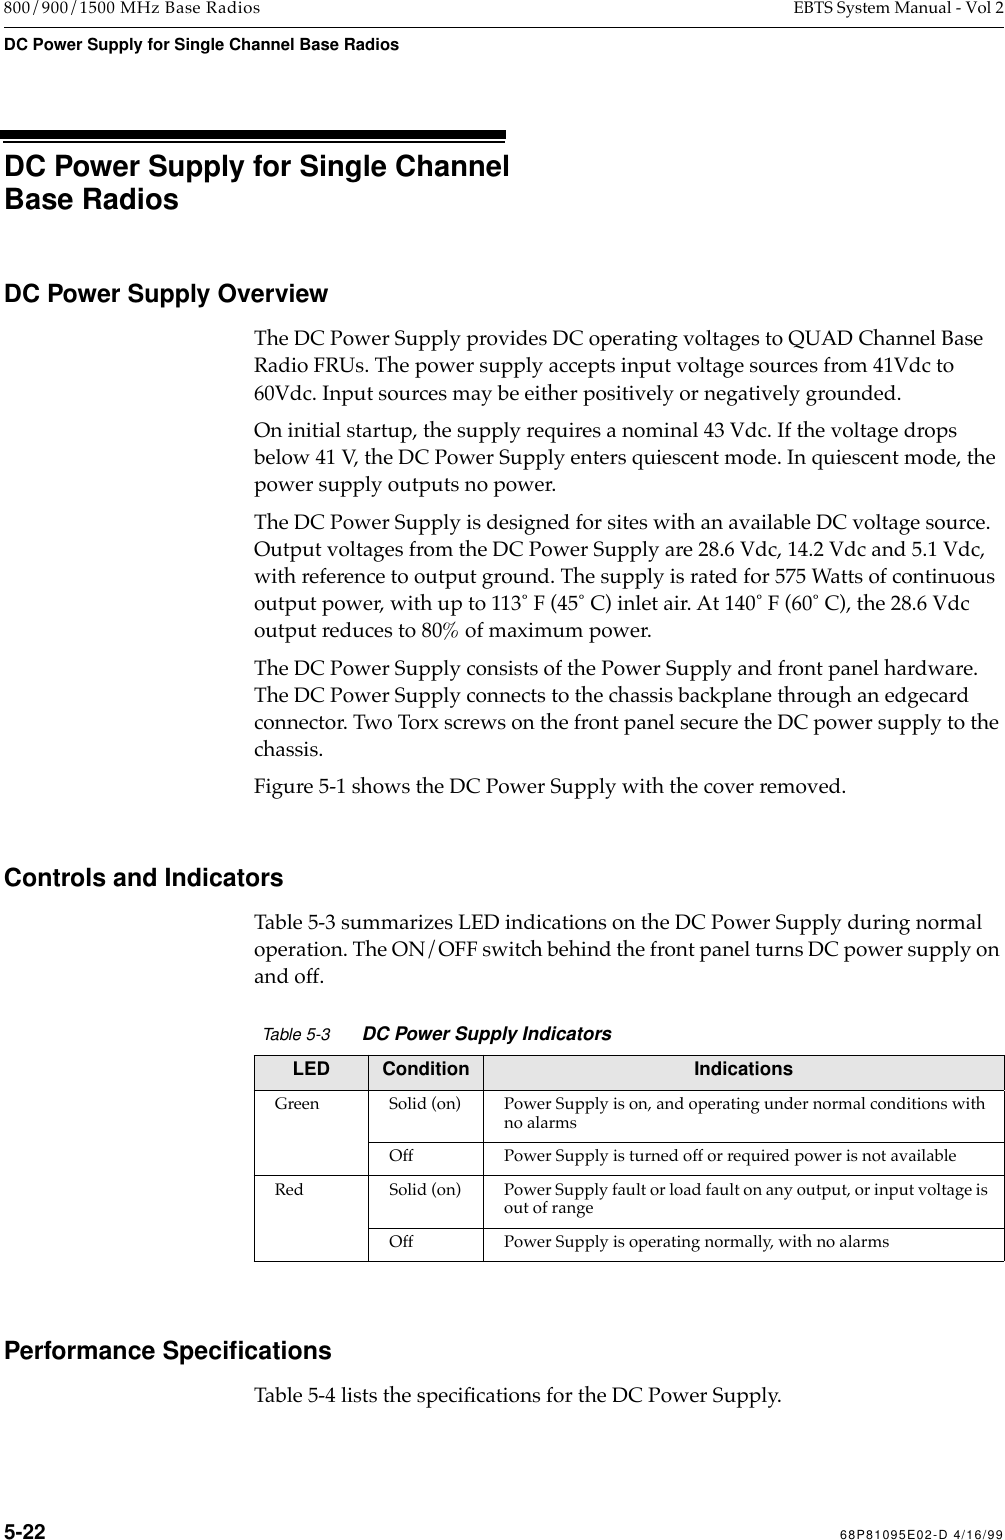  5-22 68P81095E02-D 4/16/99 800/900/1500 MHz Base Radios EBTS System Manual - Vol 2 DC Power Supply for Single Channel Base Radios   DC Power Supply for Single Channel Base Radios DC Power Supply Overview The DC Power Supply provides DC operating voltages to QUAD Channel Base Radio FRUs. The power supply accepts input voltage sources from 41Vdc to 60Vdc. Input sources may be either positively or negatively grounded.On initial startup, the supply requires a nominal 43 Vdc. If the voltage drops below 41 V, the DC Power Supply enters quiescent mode. In quiescent mode, the power supply outputs no power.The DC Power Supply is designed for sites with an available DC voltage source. Output voltages from the DC Power Supply are 28.6 Vdc, 14.2 Vdc and 5.1 Vdc, with reference to output ground. The supply is rated for 575 Watts of continuous output power, with up to 113û F (45û C) inlet air. At 140û F (60û C), the 28.6 Vdc output reduces to 80% of maximum power. The DC Power Supply consists of the Power Supply and front panel hardware. The DC Power Supply connects to the chassis backplane through an edgecard connector. Two Torx screws on the front panel secure the DC power supply to the chassis.Figure 5-1 shows the DC Power Supply with the cover removed. Controls and Indicators Table 5-3 summarizes LED indications on the DC Power Supply during normal operation. The ON/OFF switch behind the front panel turns DC power supply on and off. Performance Speciﬁcations  Table 5-4 lists the speciÞcations for the DC Power Supply. Table 5-3 DC Power Supply Indicators LED Condition Indications Green Solid (on) Power Supply is on, and operating under normal conditions with no alarmsOff Power Supply is turned off or required power is not availableRed Solid (on) Power Supply fault or load fault on any output, or input voltage is out of rangeOff Power Supply is operating normally, with no alarms